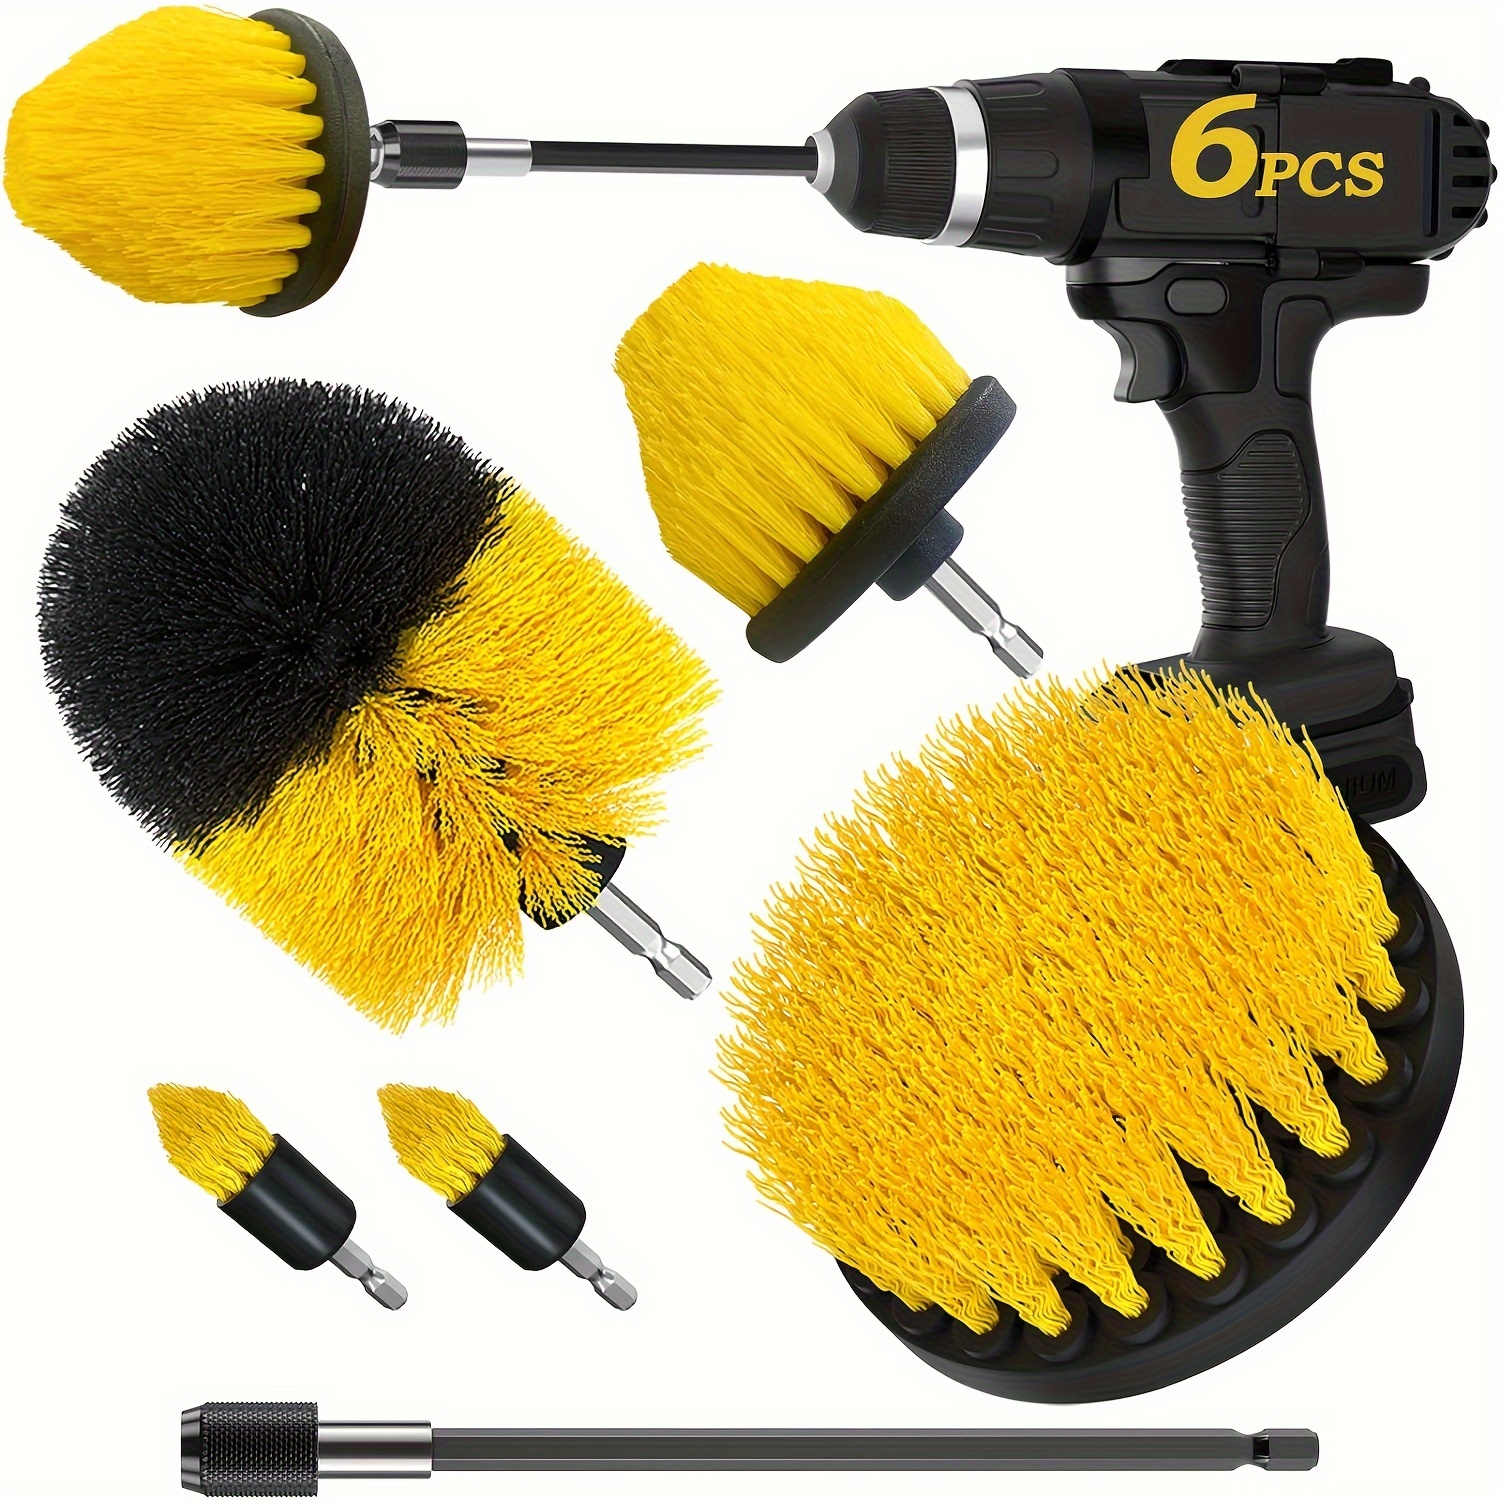 

6-piece Drill Brush Attachment Set - Reusable, Durable Plastic For Car Cleaning & More Drill Brushes For Cleaning With Drill Rechargeable Cleaning Brush